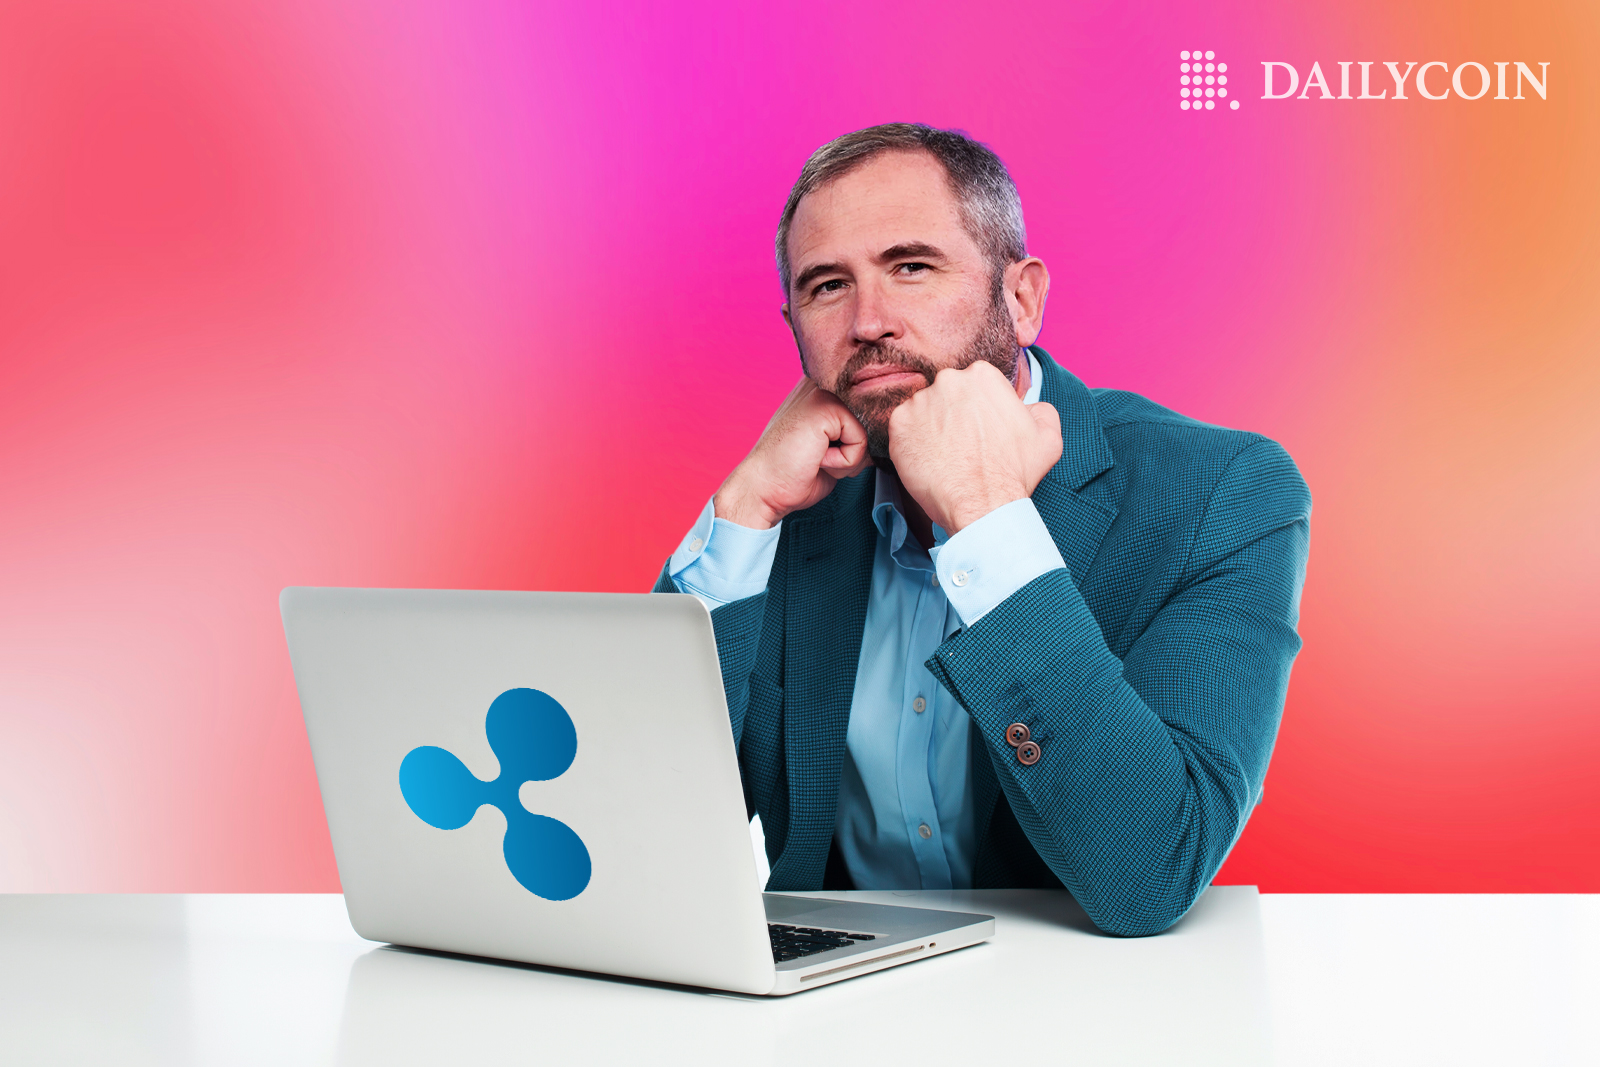 Ripple CEO Brad Garlinghouse awaiting the outcome of Gary Gensler's SEC testimony